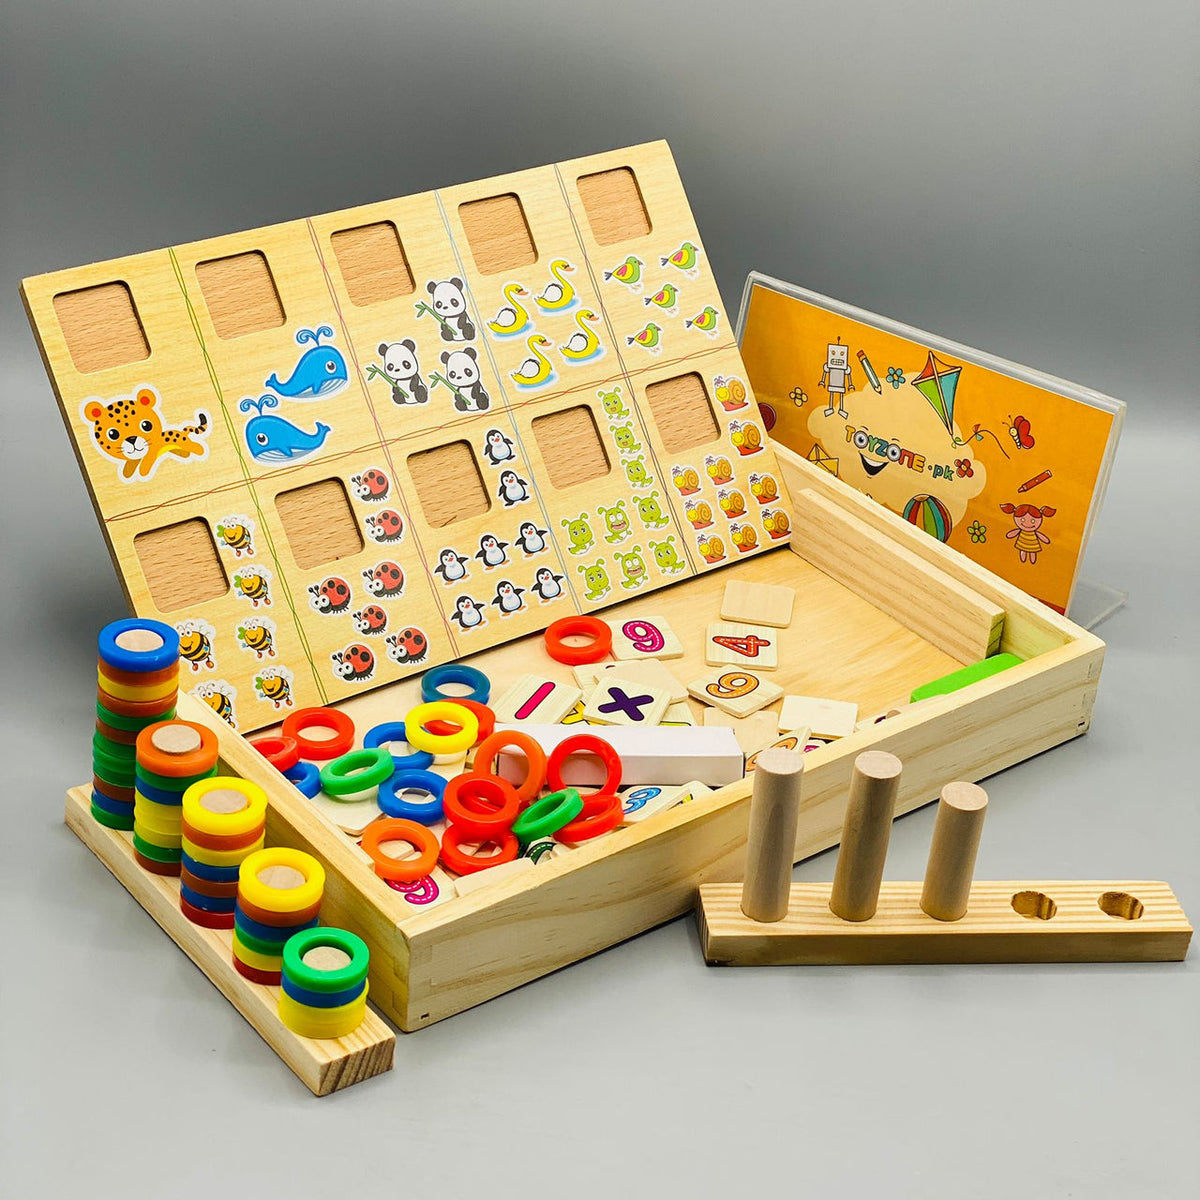 Multifunctional Wooden Donut Arithmetic Counting Stick learning box For Kids